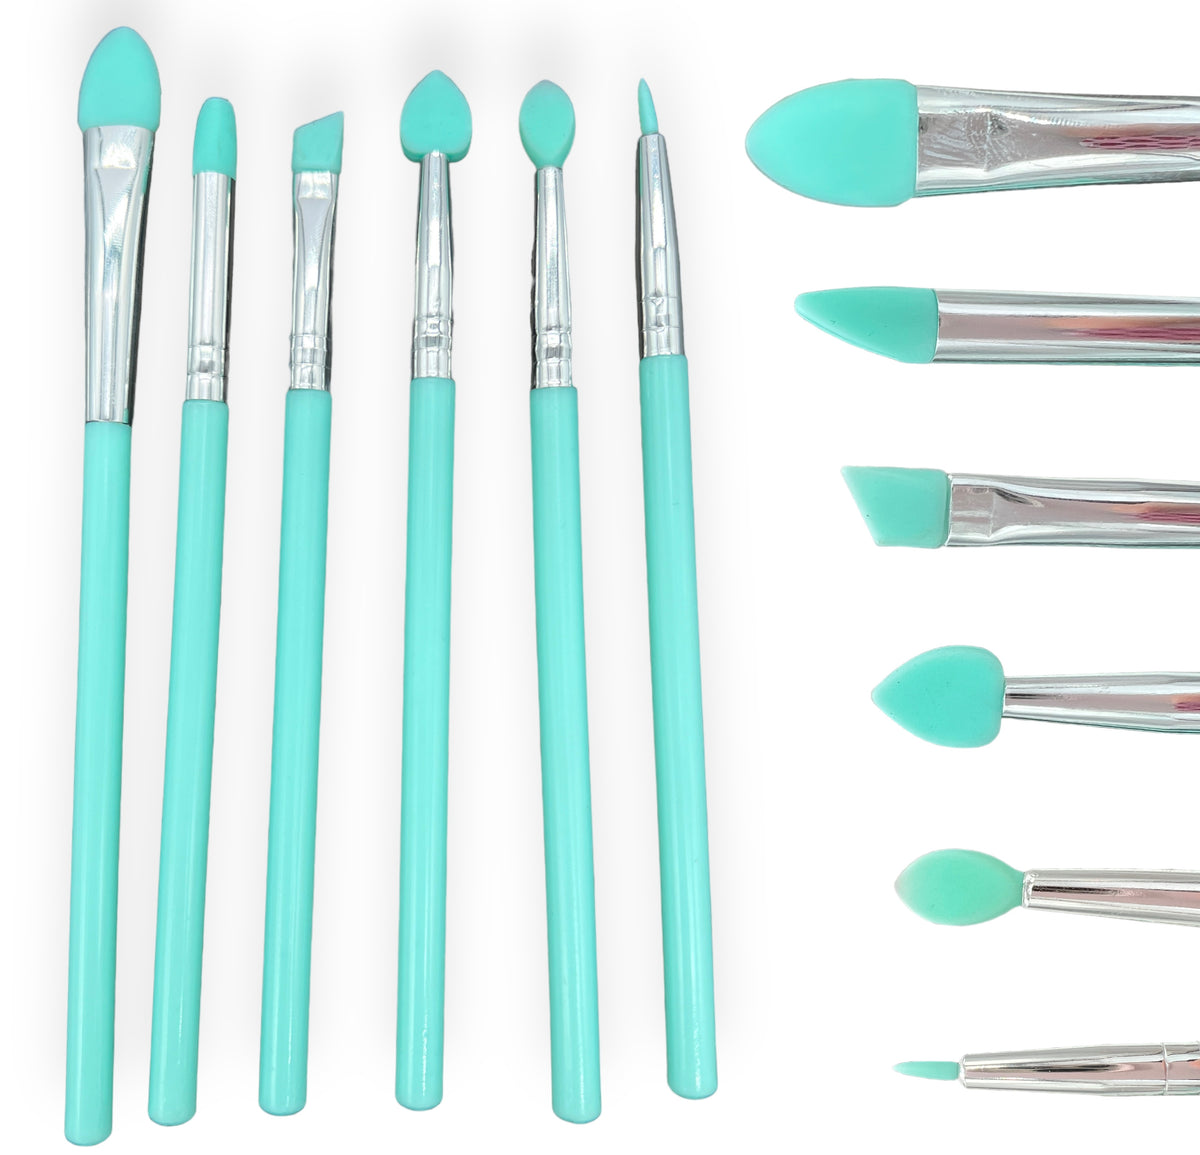 6 Piece Set Reusable Silicone Brush Set in Teal for Epoxy and UV Resin Art